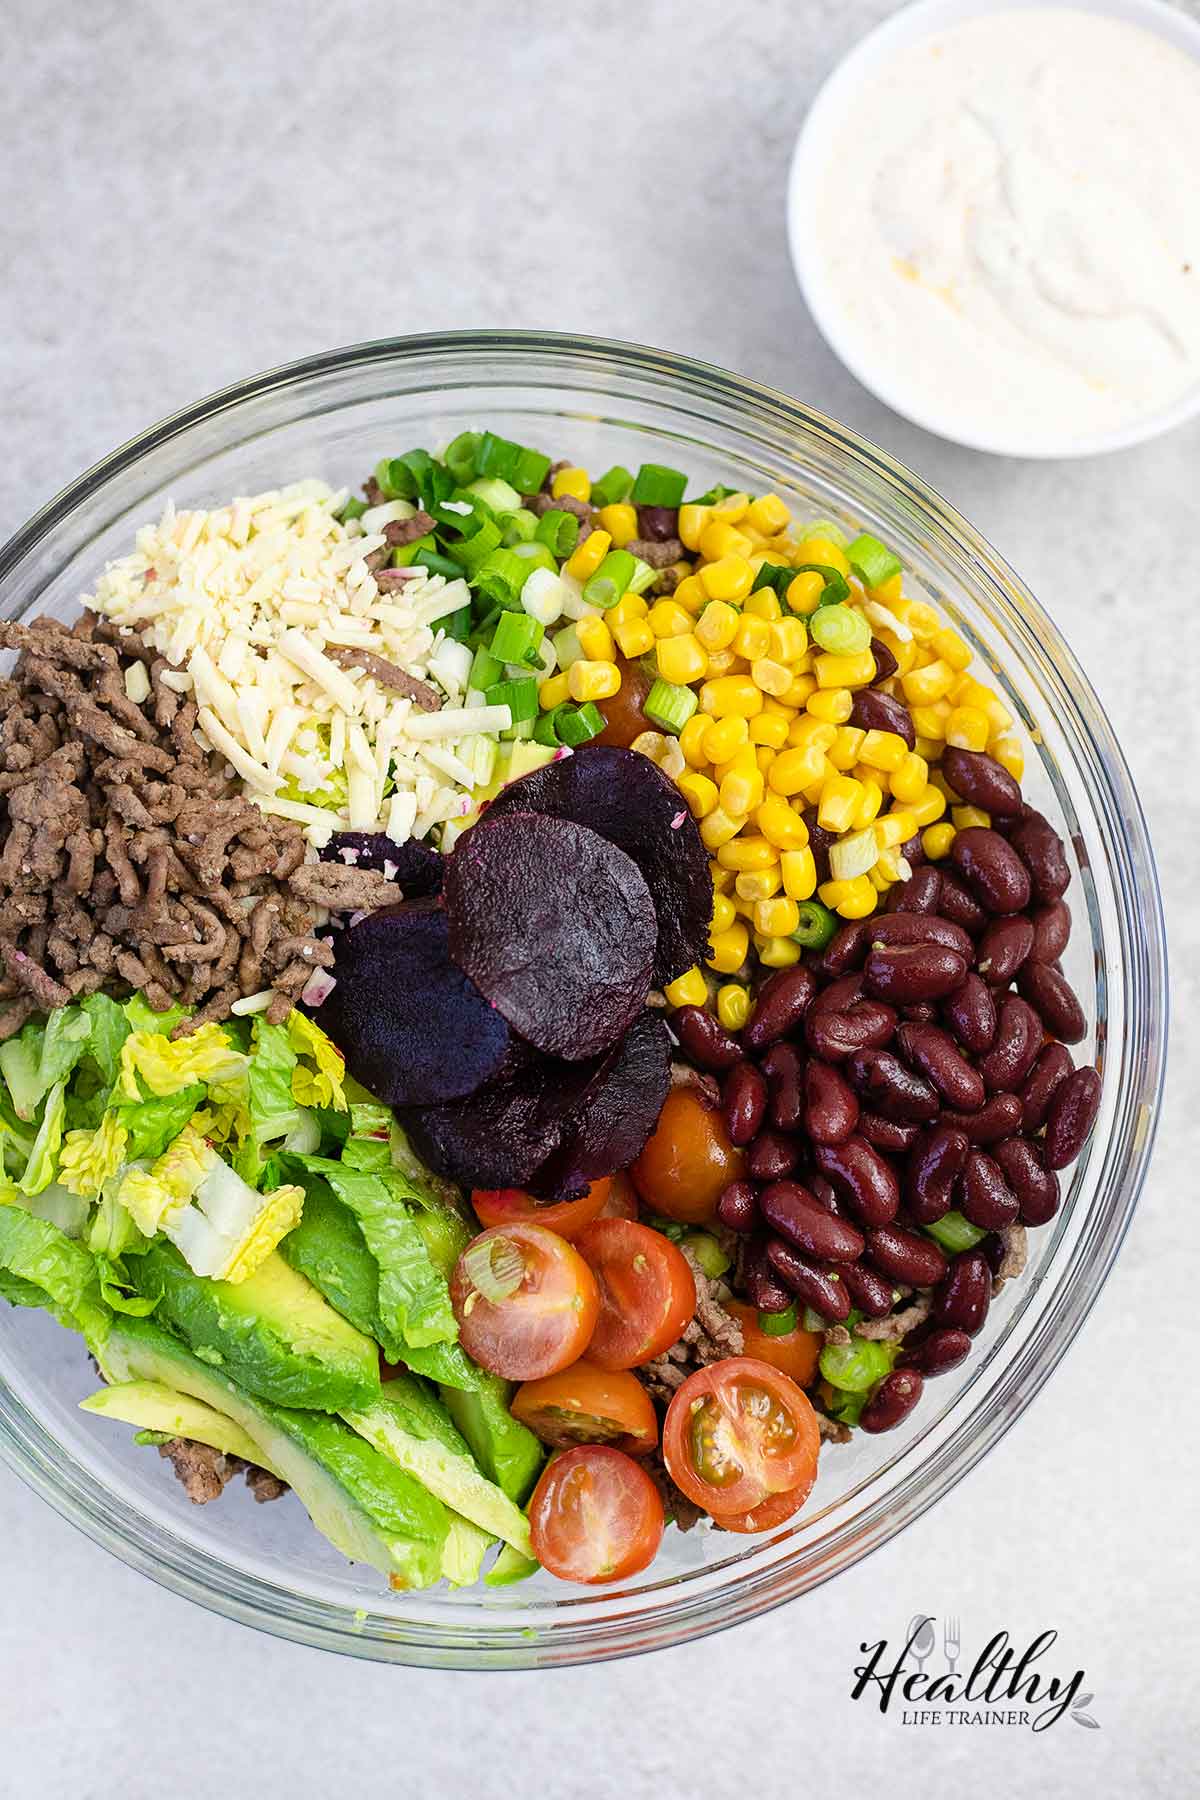 In a bowl, avocado, lettuce, tomatoes, green onions, beetroots, kidney beans, sweetcorn, cheddar cheese, and the cooked ground beef.